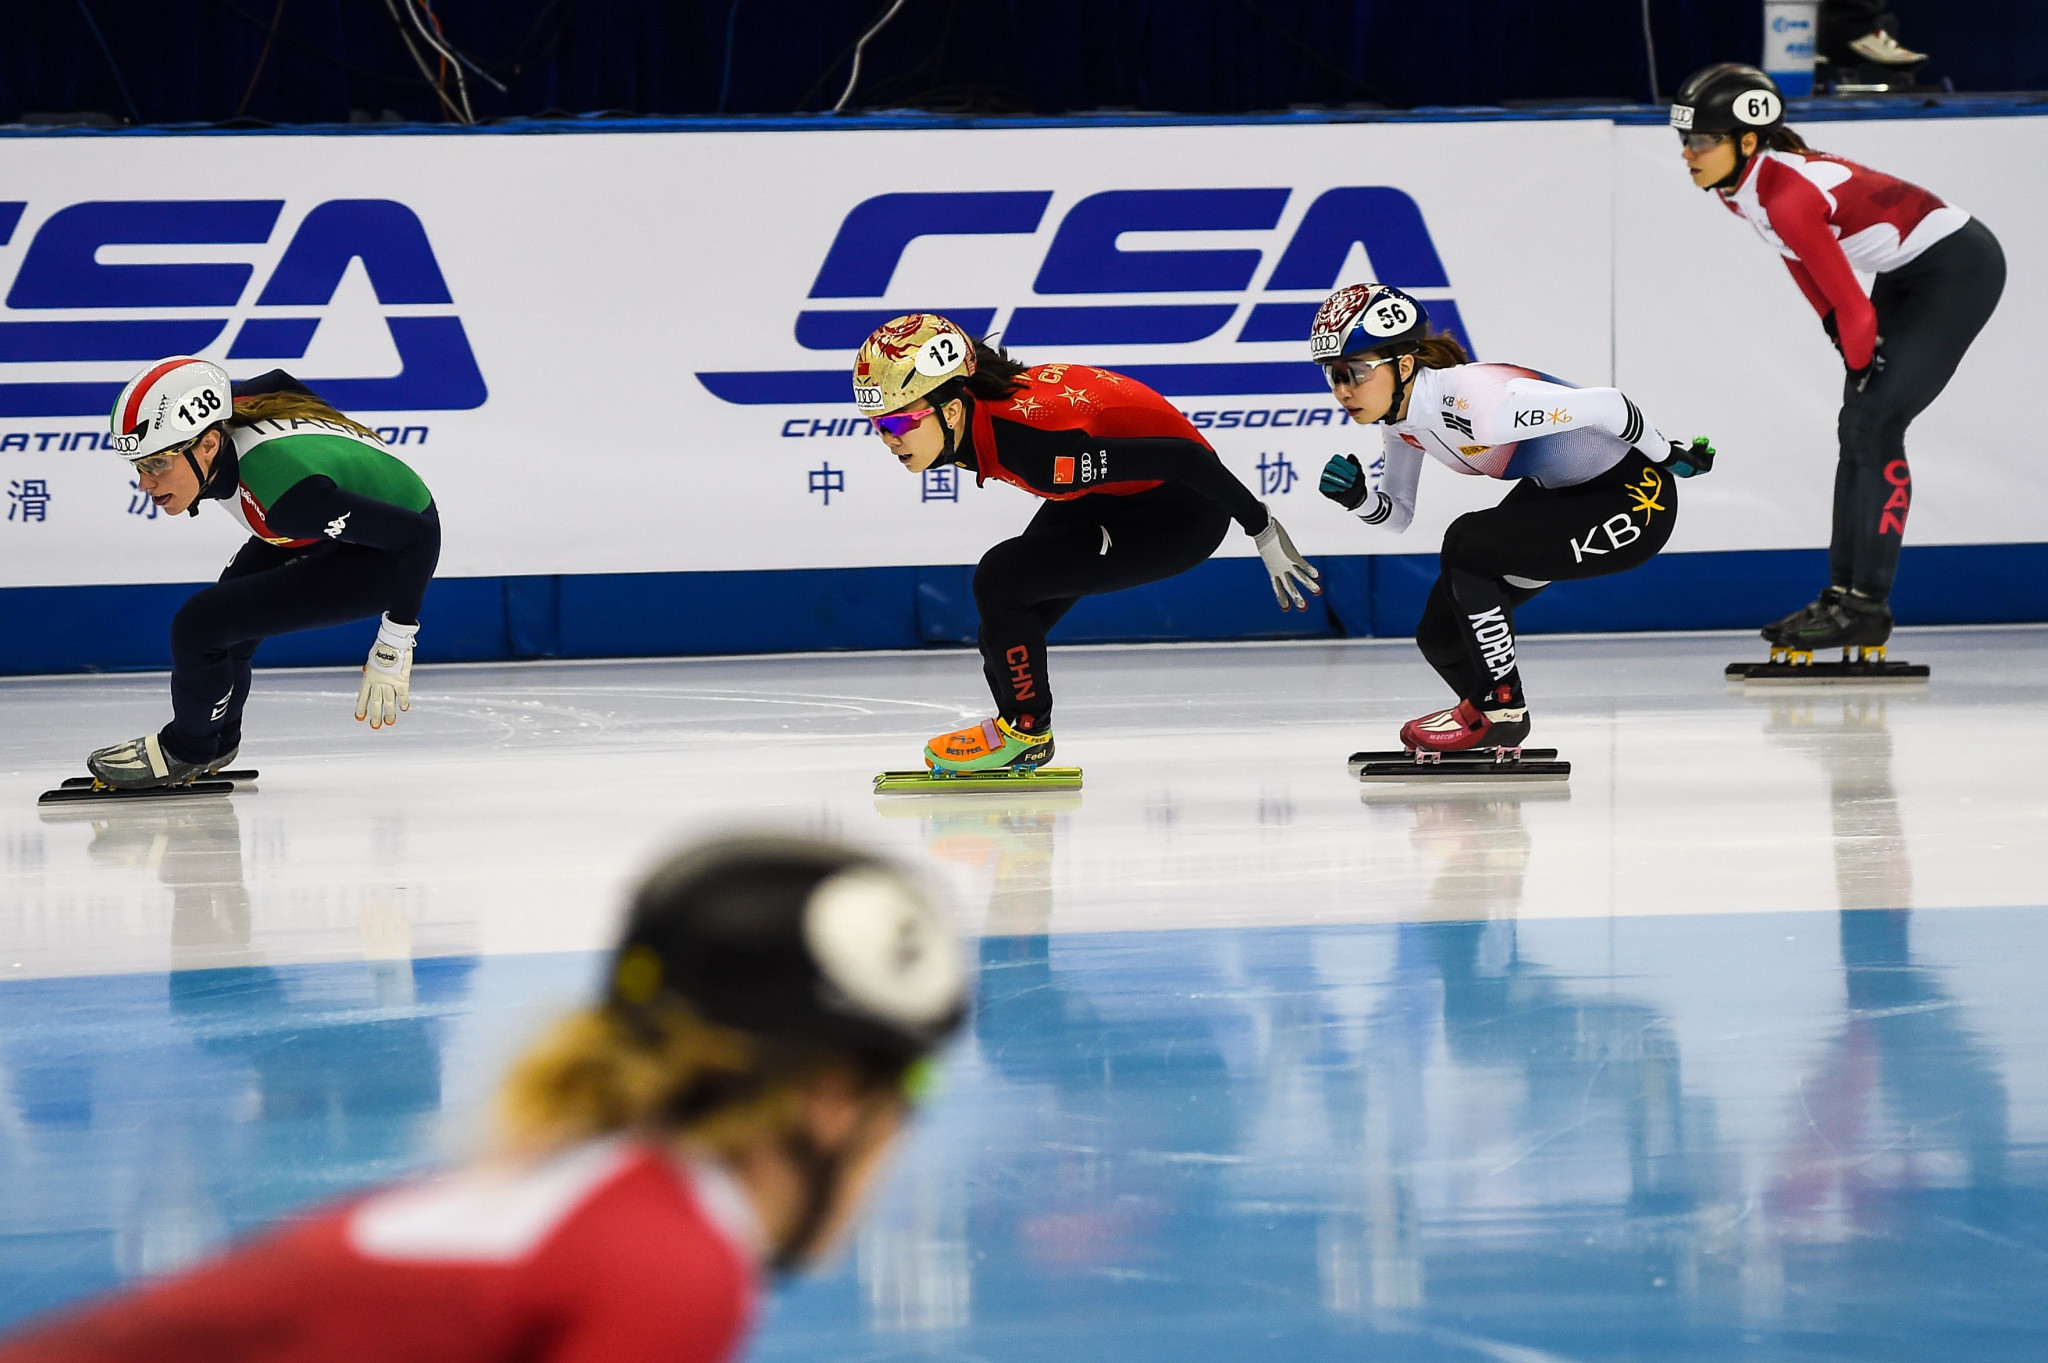 Pyeongchang 2018 qualification to conclude at season-ending ISU Short Track World Cup